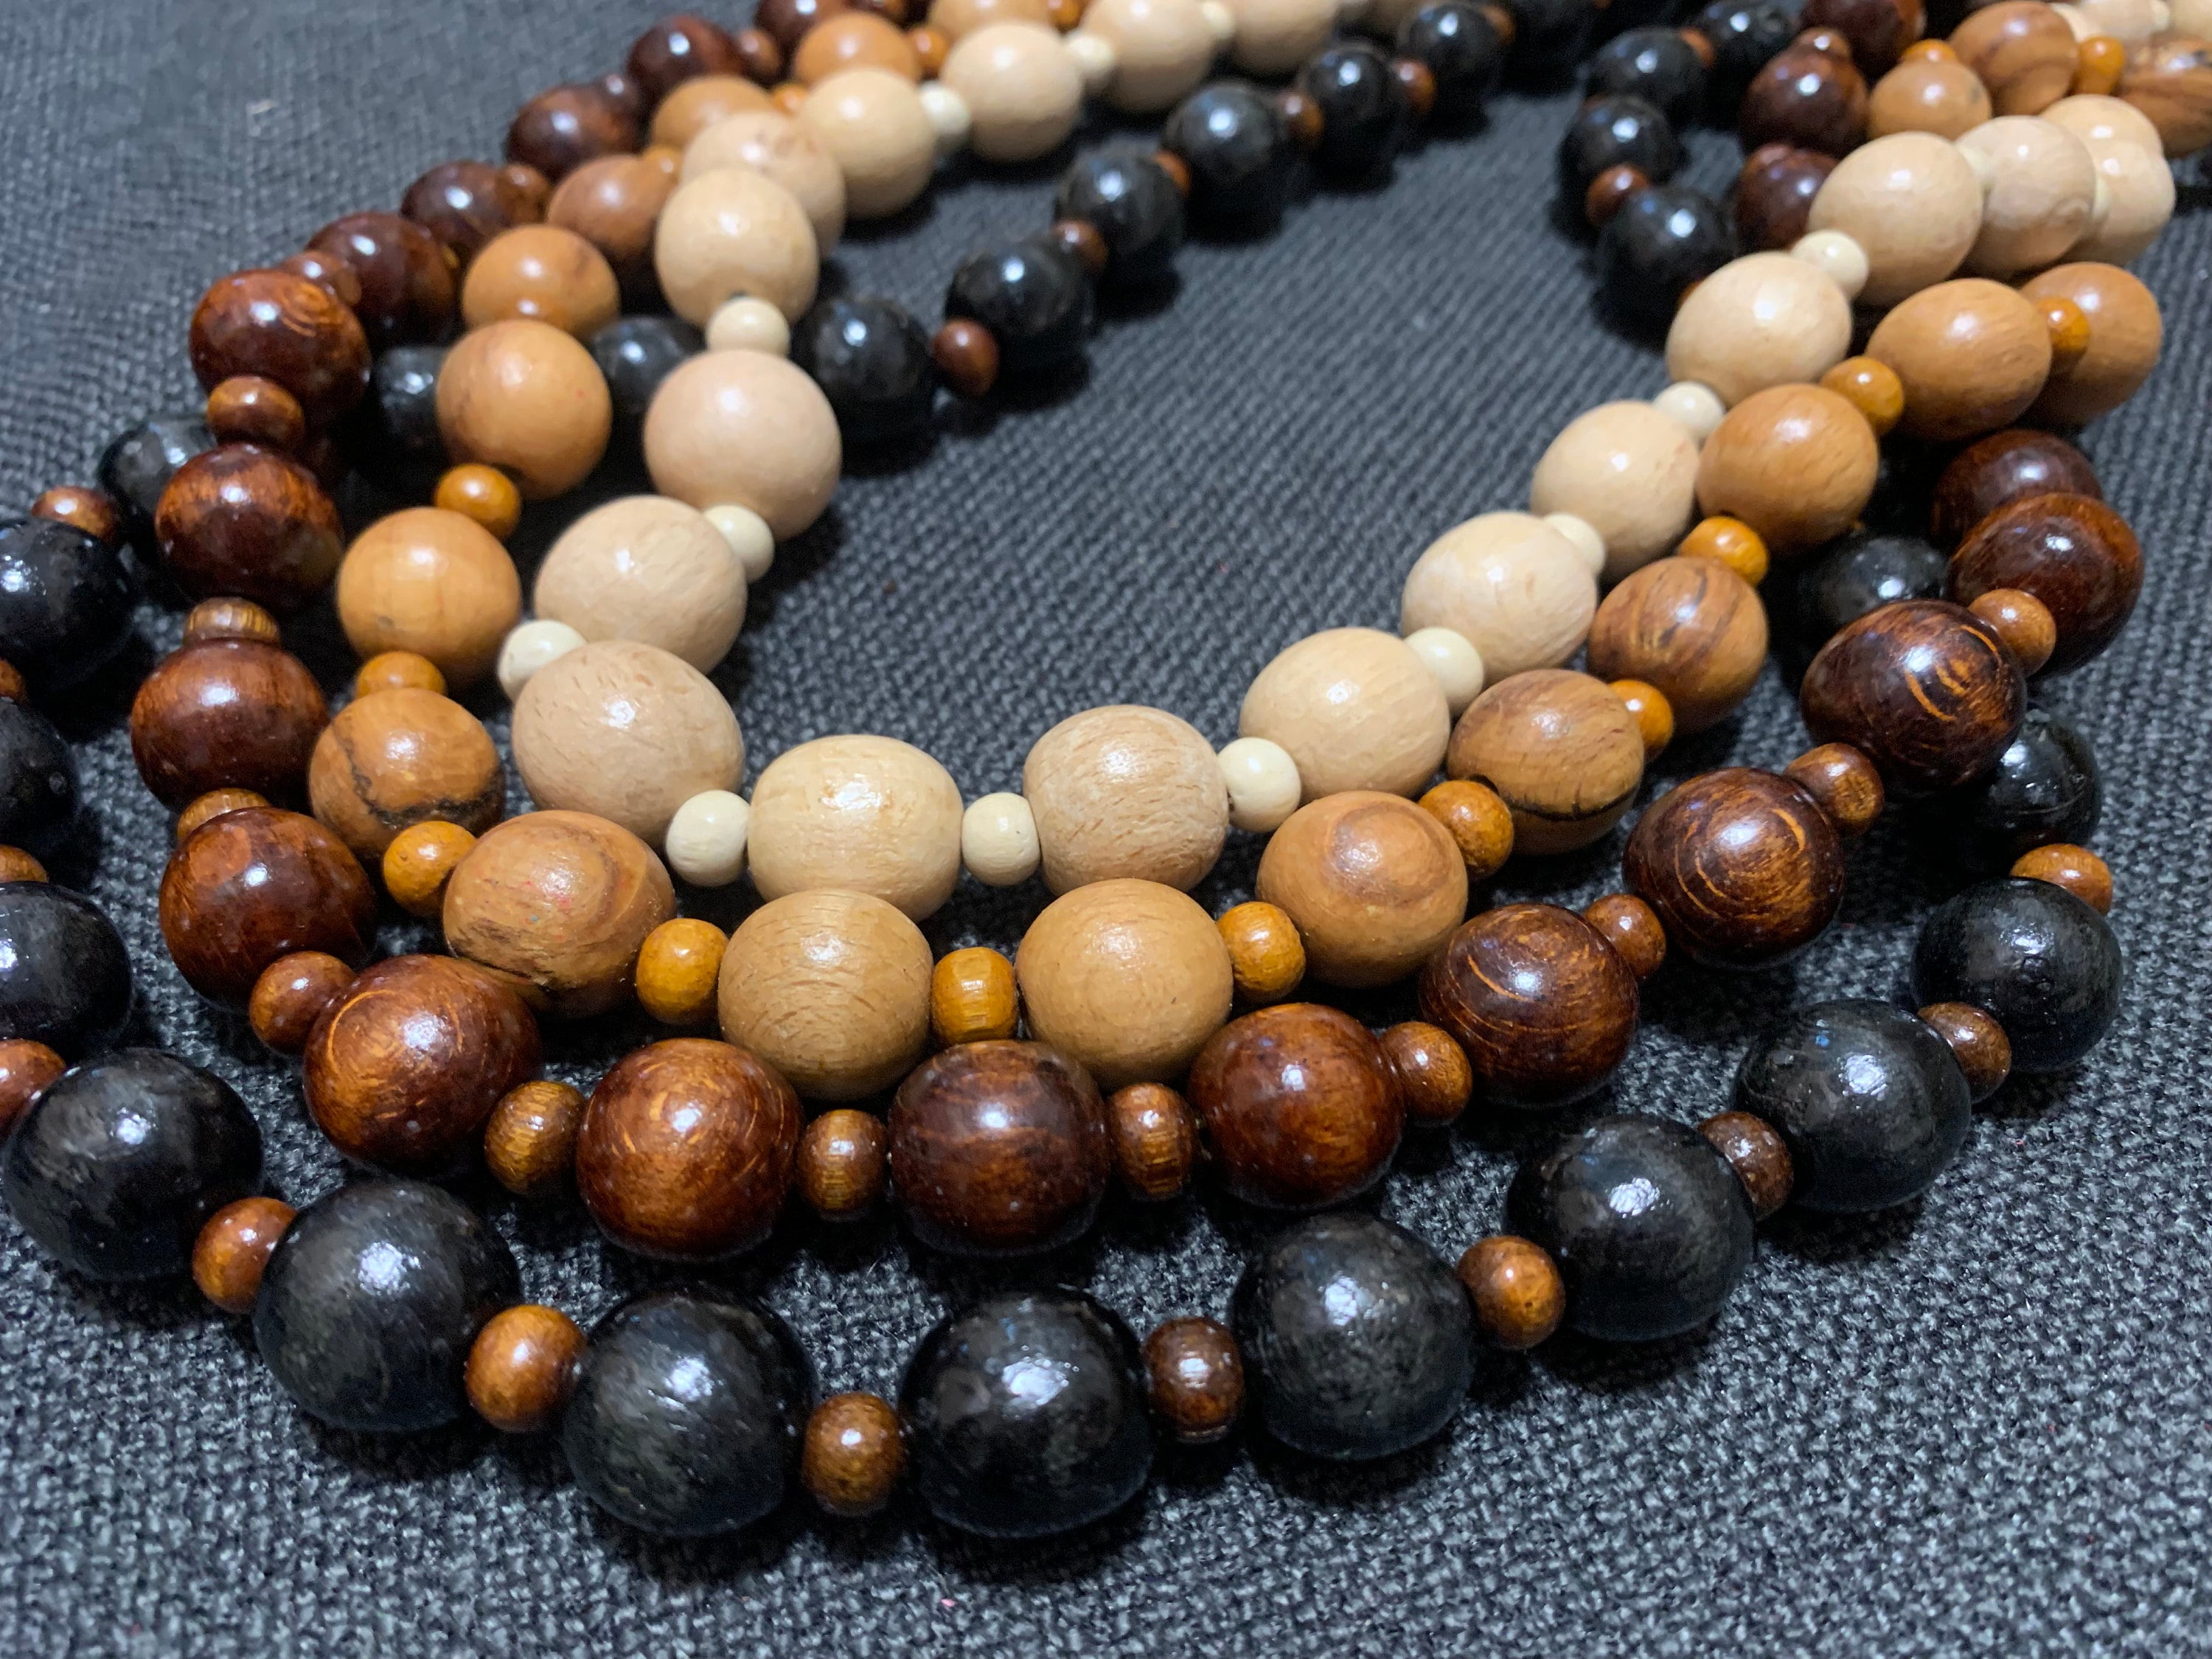 The Akuma Two Toned Wooden Necklace/ Large Wooden Bead Necklace for Men 